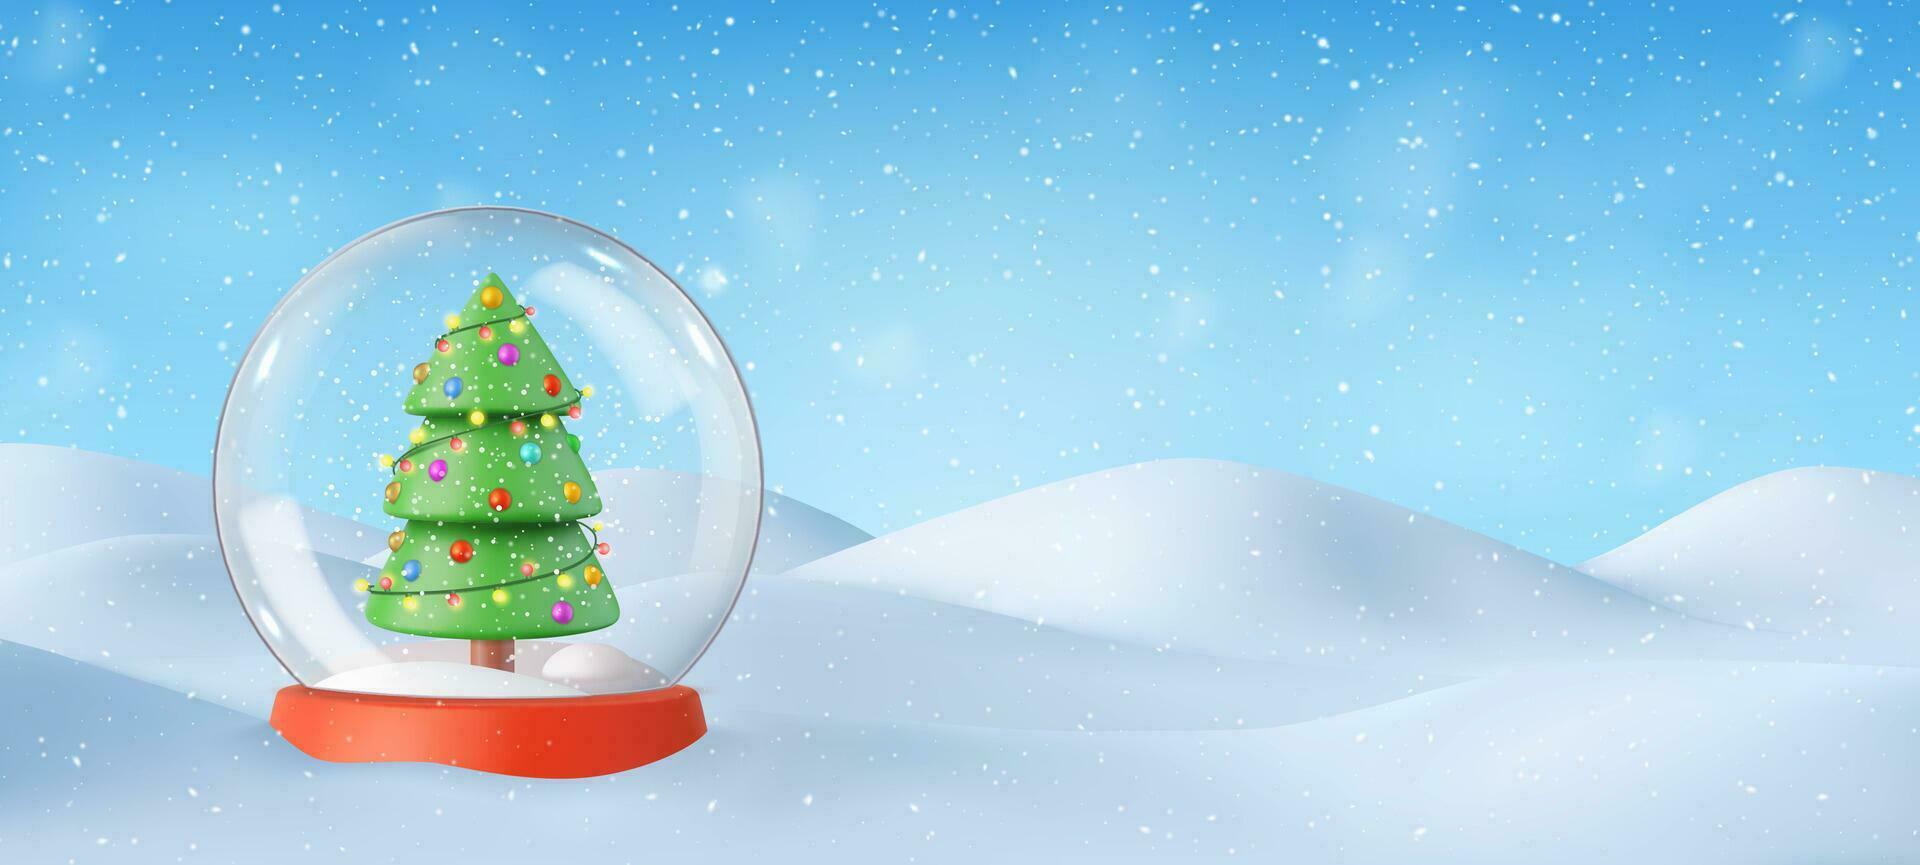 3d Snow globe with Christmas tree in snow vector